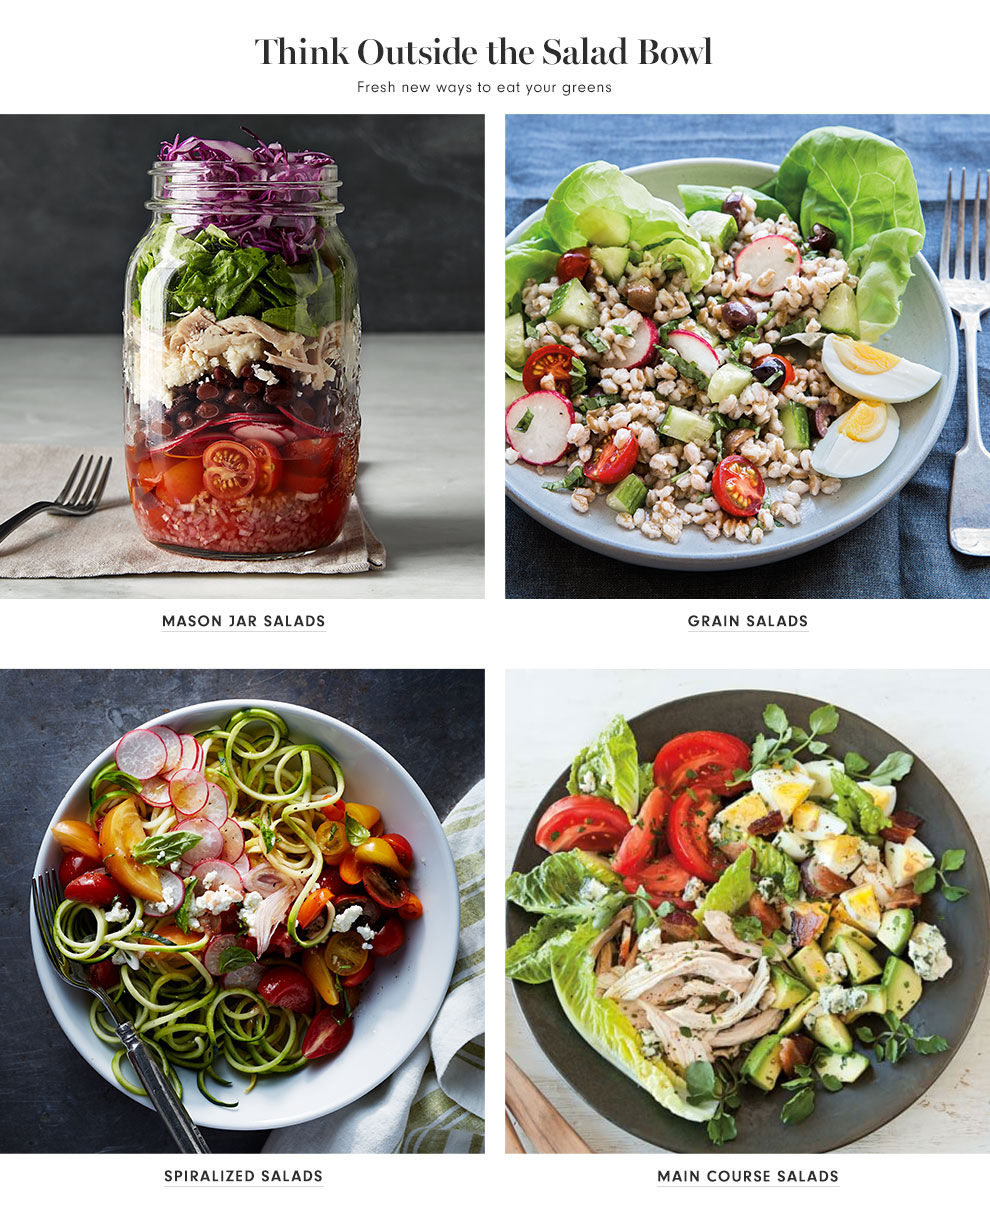 Think Outside the Salad Bowls